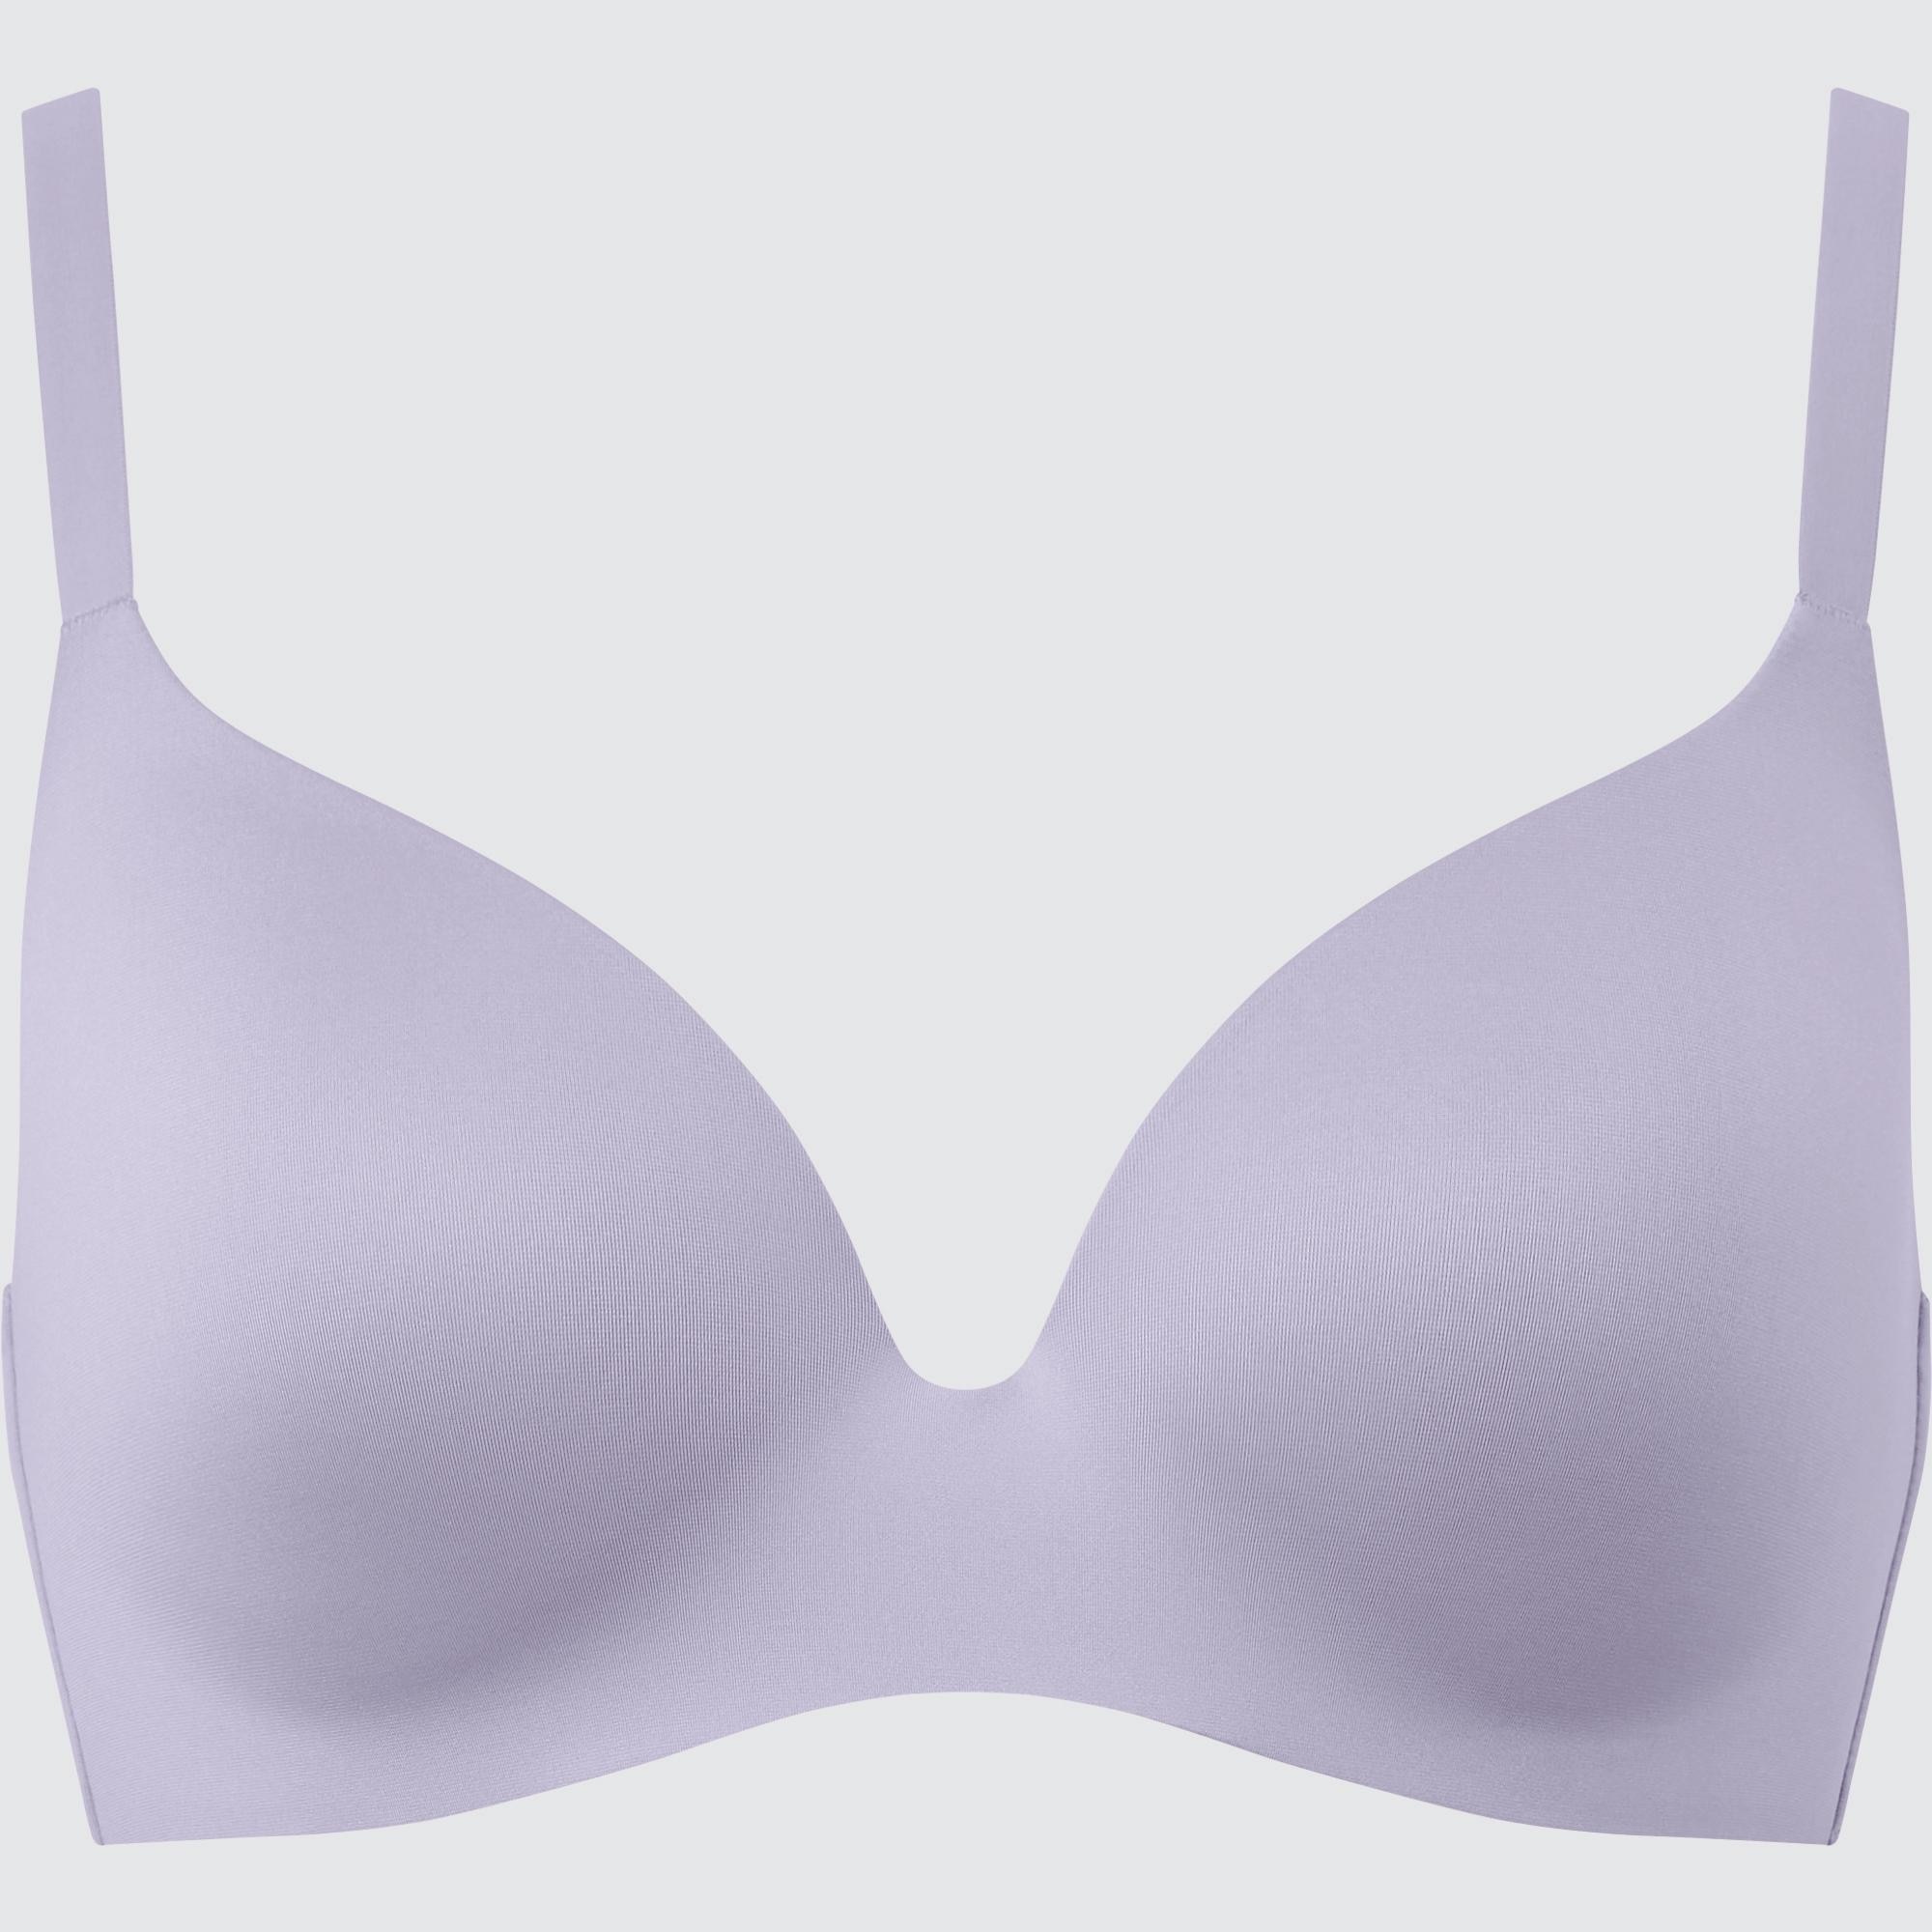 Review] Uniqlo Beauty Light Wireless bras - life changing! - Mehach